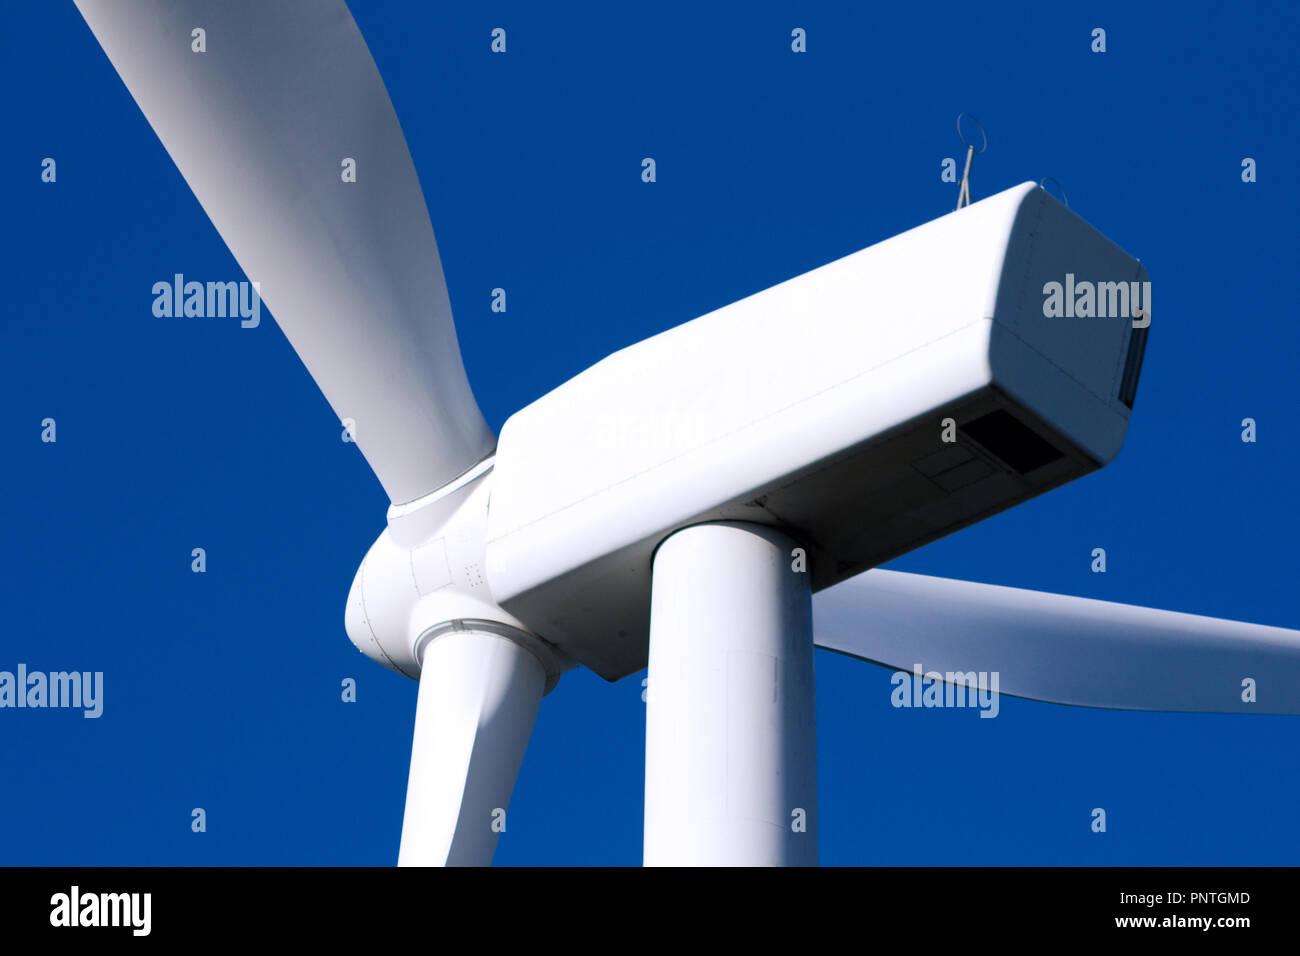 Pico Gallo, Tineo, Asturias. Back view of blades, rotor hub and full nacelle of a wind mill with dark blue sky. Stock Photo